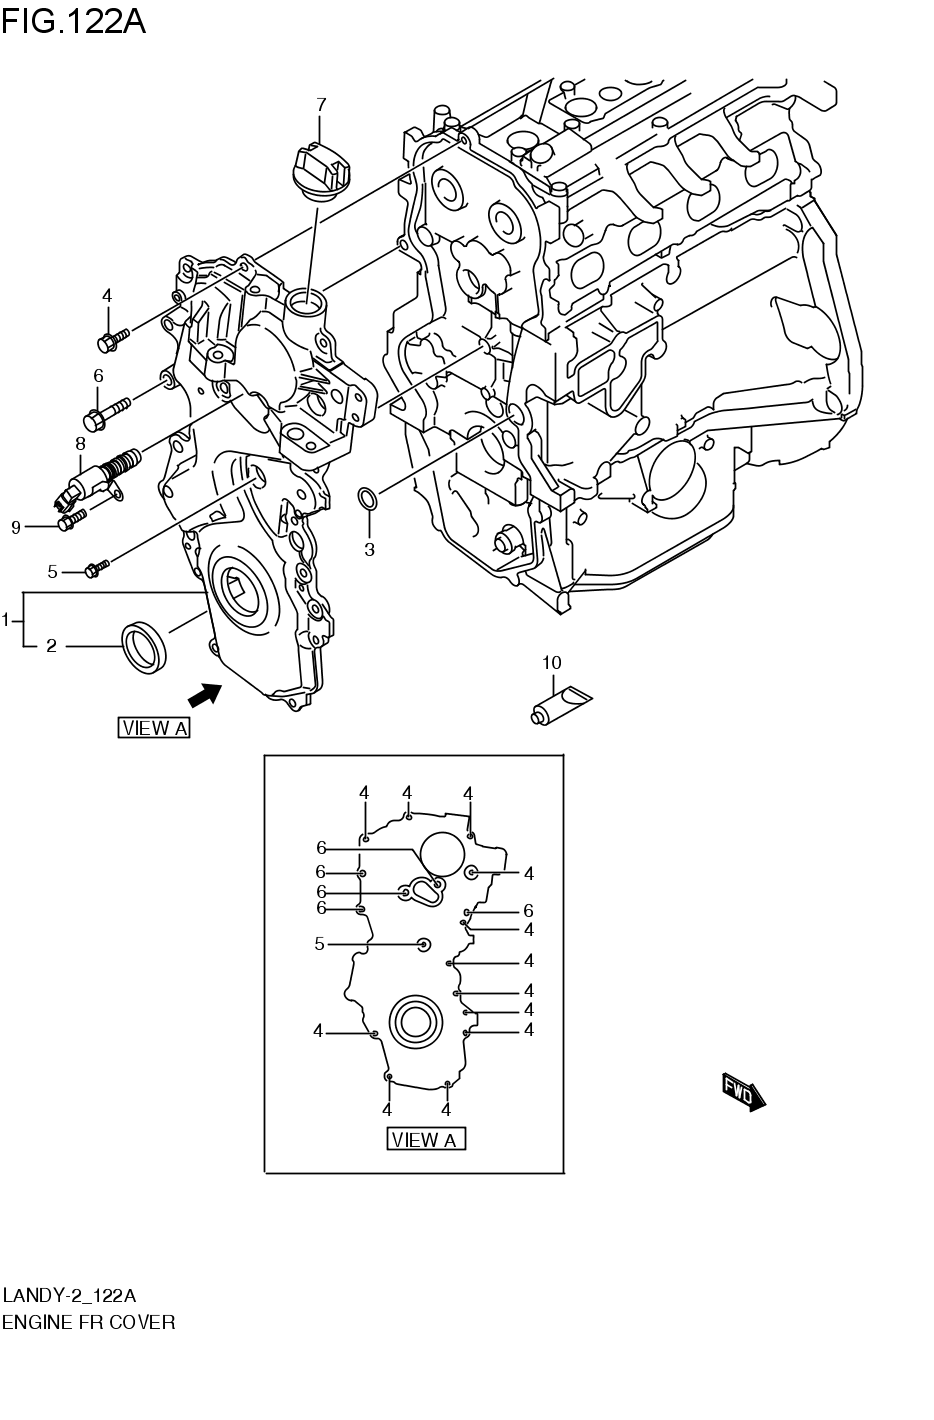 ENGINE FRONT COVER